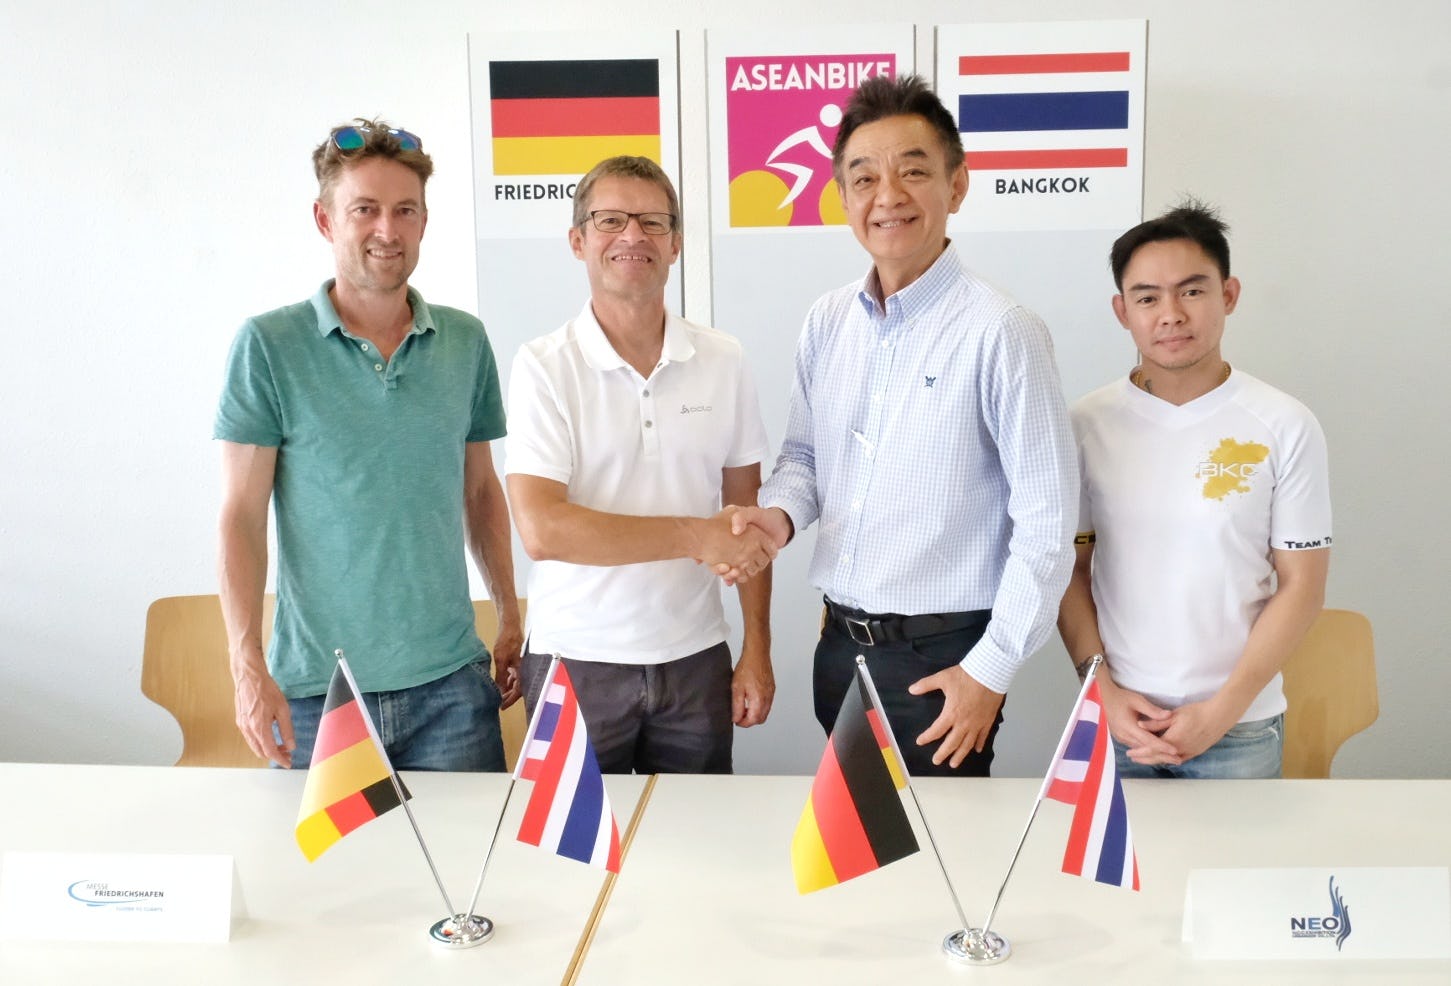 The teams of Messe Friedrichshafen and N.C.C. Exhibition Organizer concluded the agreement on organizing the ASEAN Bike. – Photo Messe Friedrichshafen